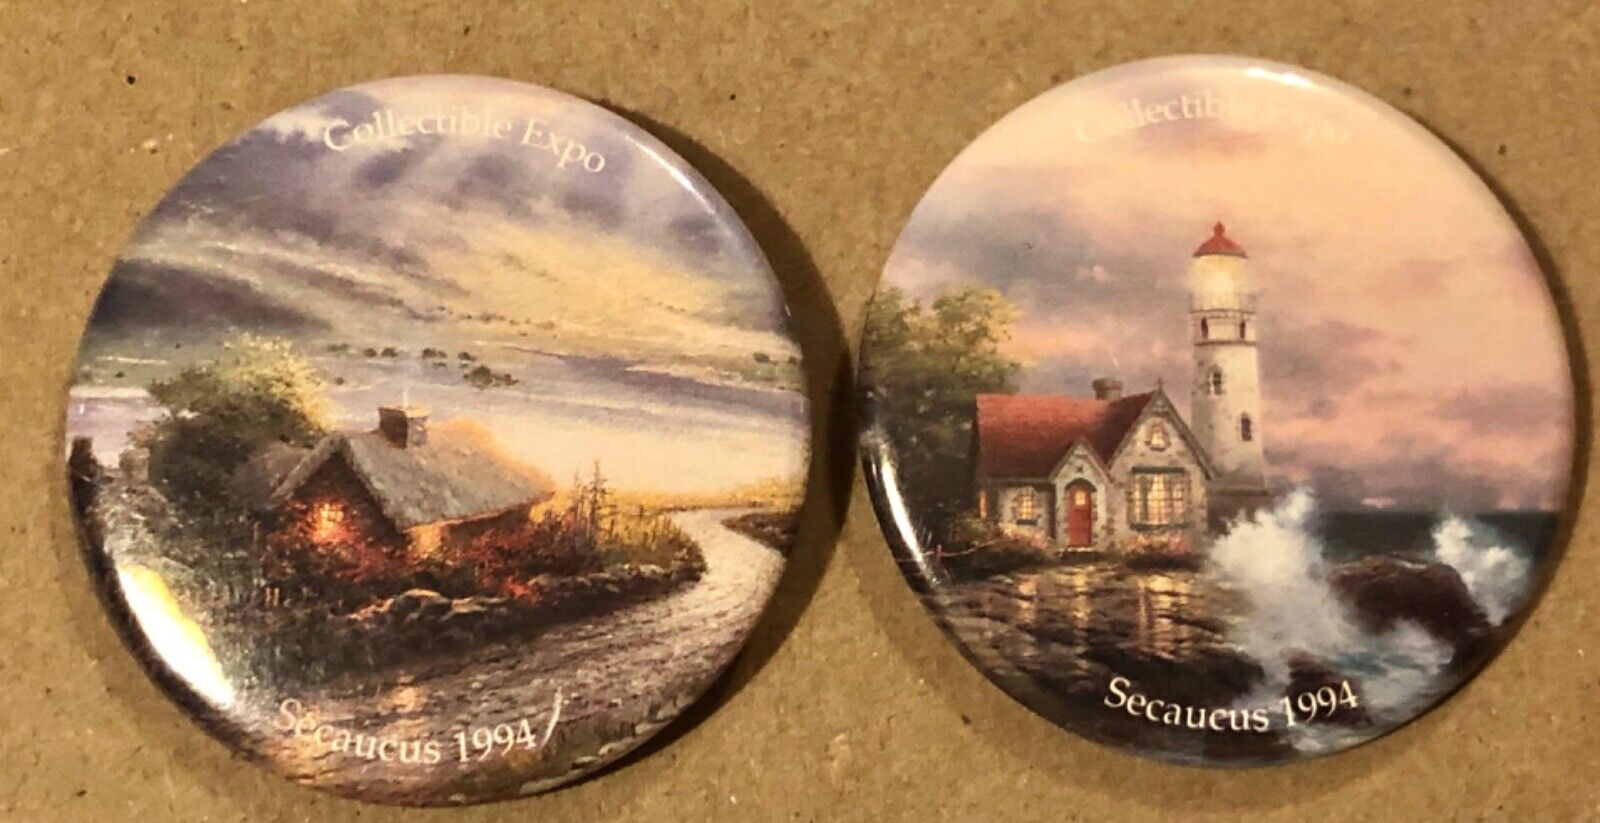 Set of 2 Vintage 1994 Pinbacks/Buttons “Collectible Expo” “Secaucus 1994”